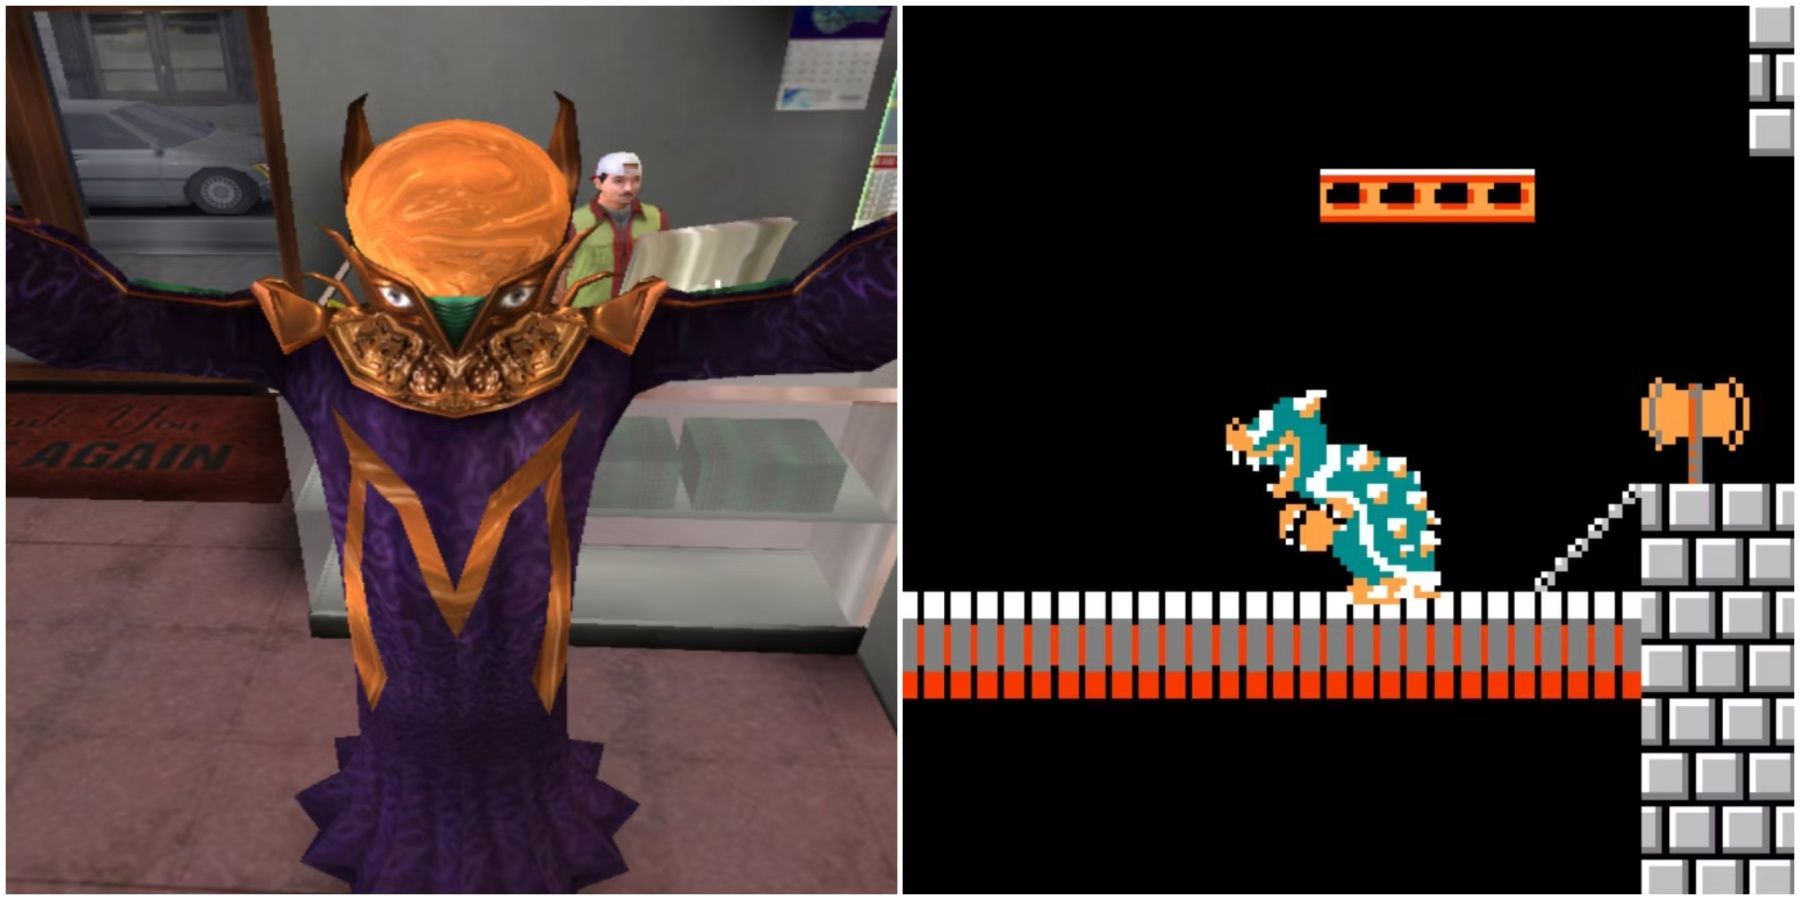 Mysterio in Spider-Man 2 and Bowser in Super Mario Bros